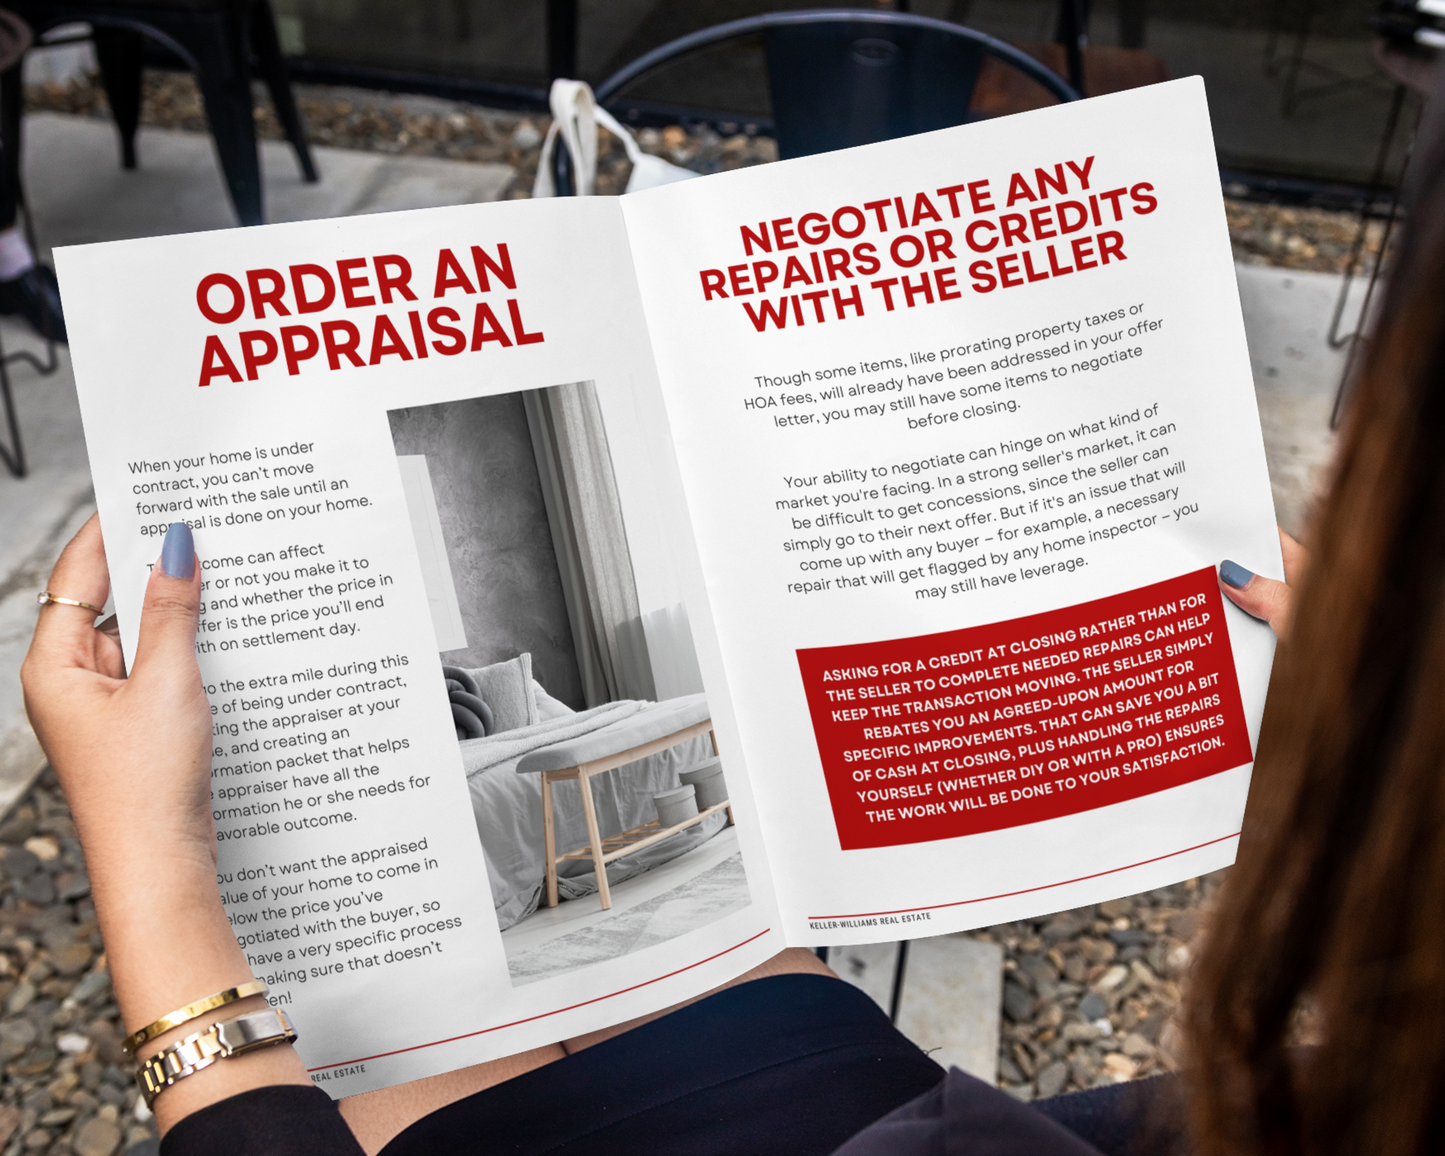 Real Estate Buyer Presentation Template for Keller Williams Buyer Presentation Template for KW Buyer Presentation Real Estate Guide